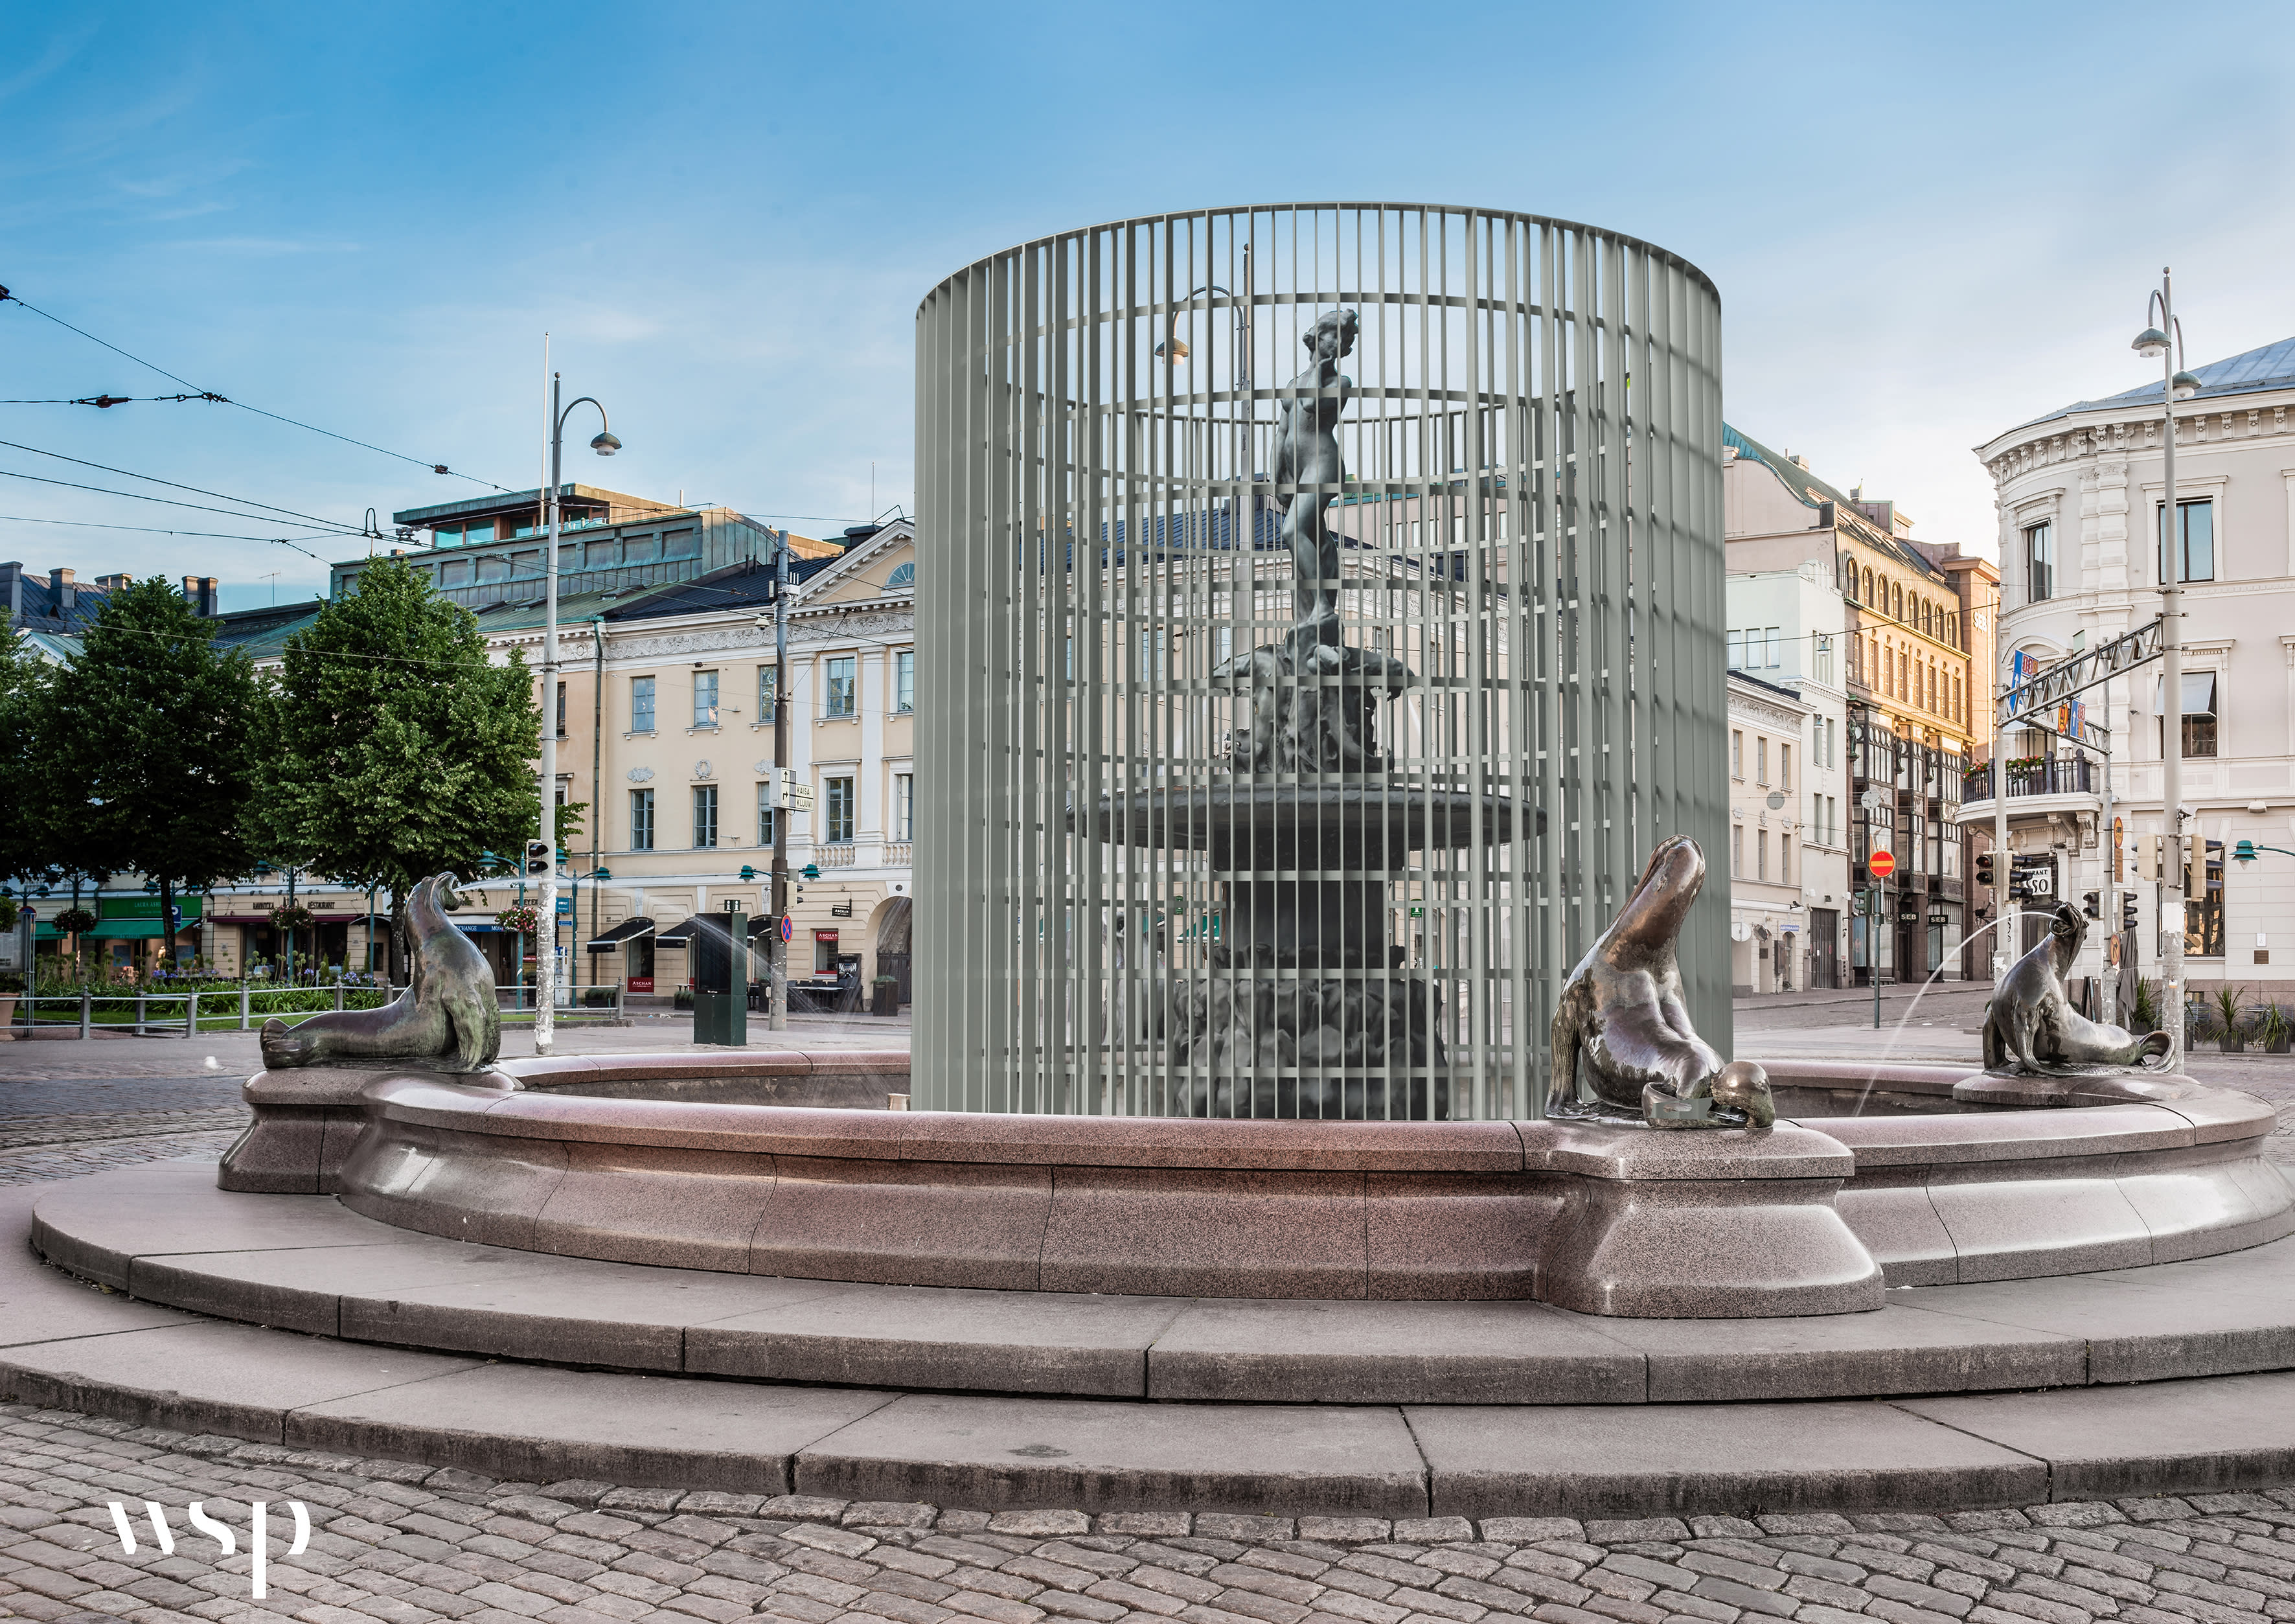 Helsinki is rethinking the fence design of the iconic statue